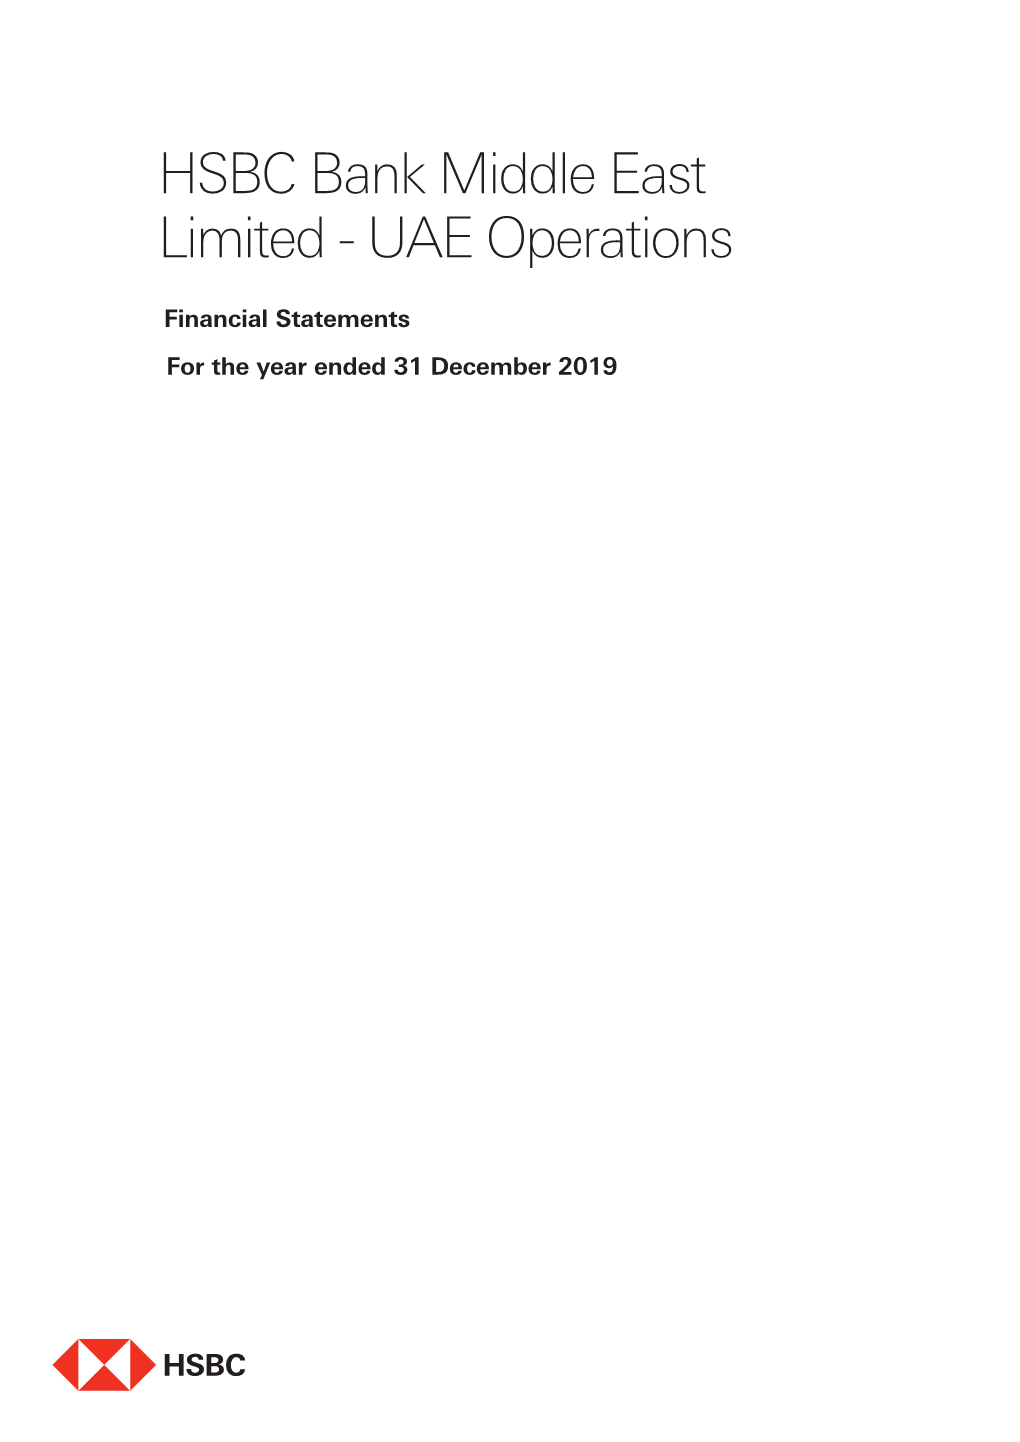 HSBC Bank Middle East Limited - UAE Operations